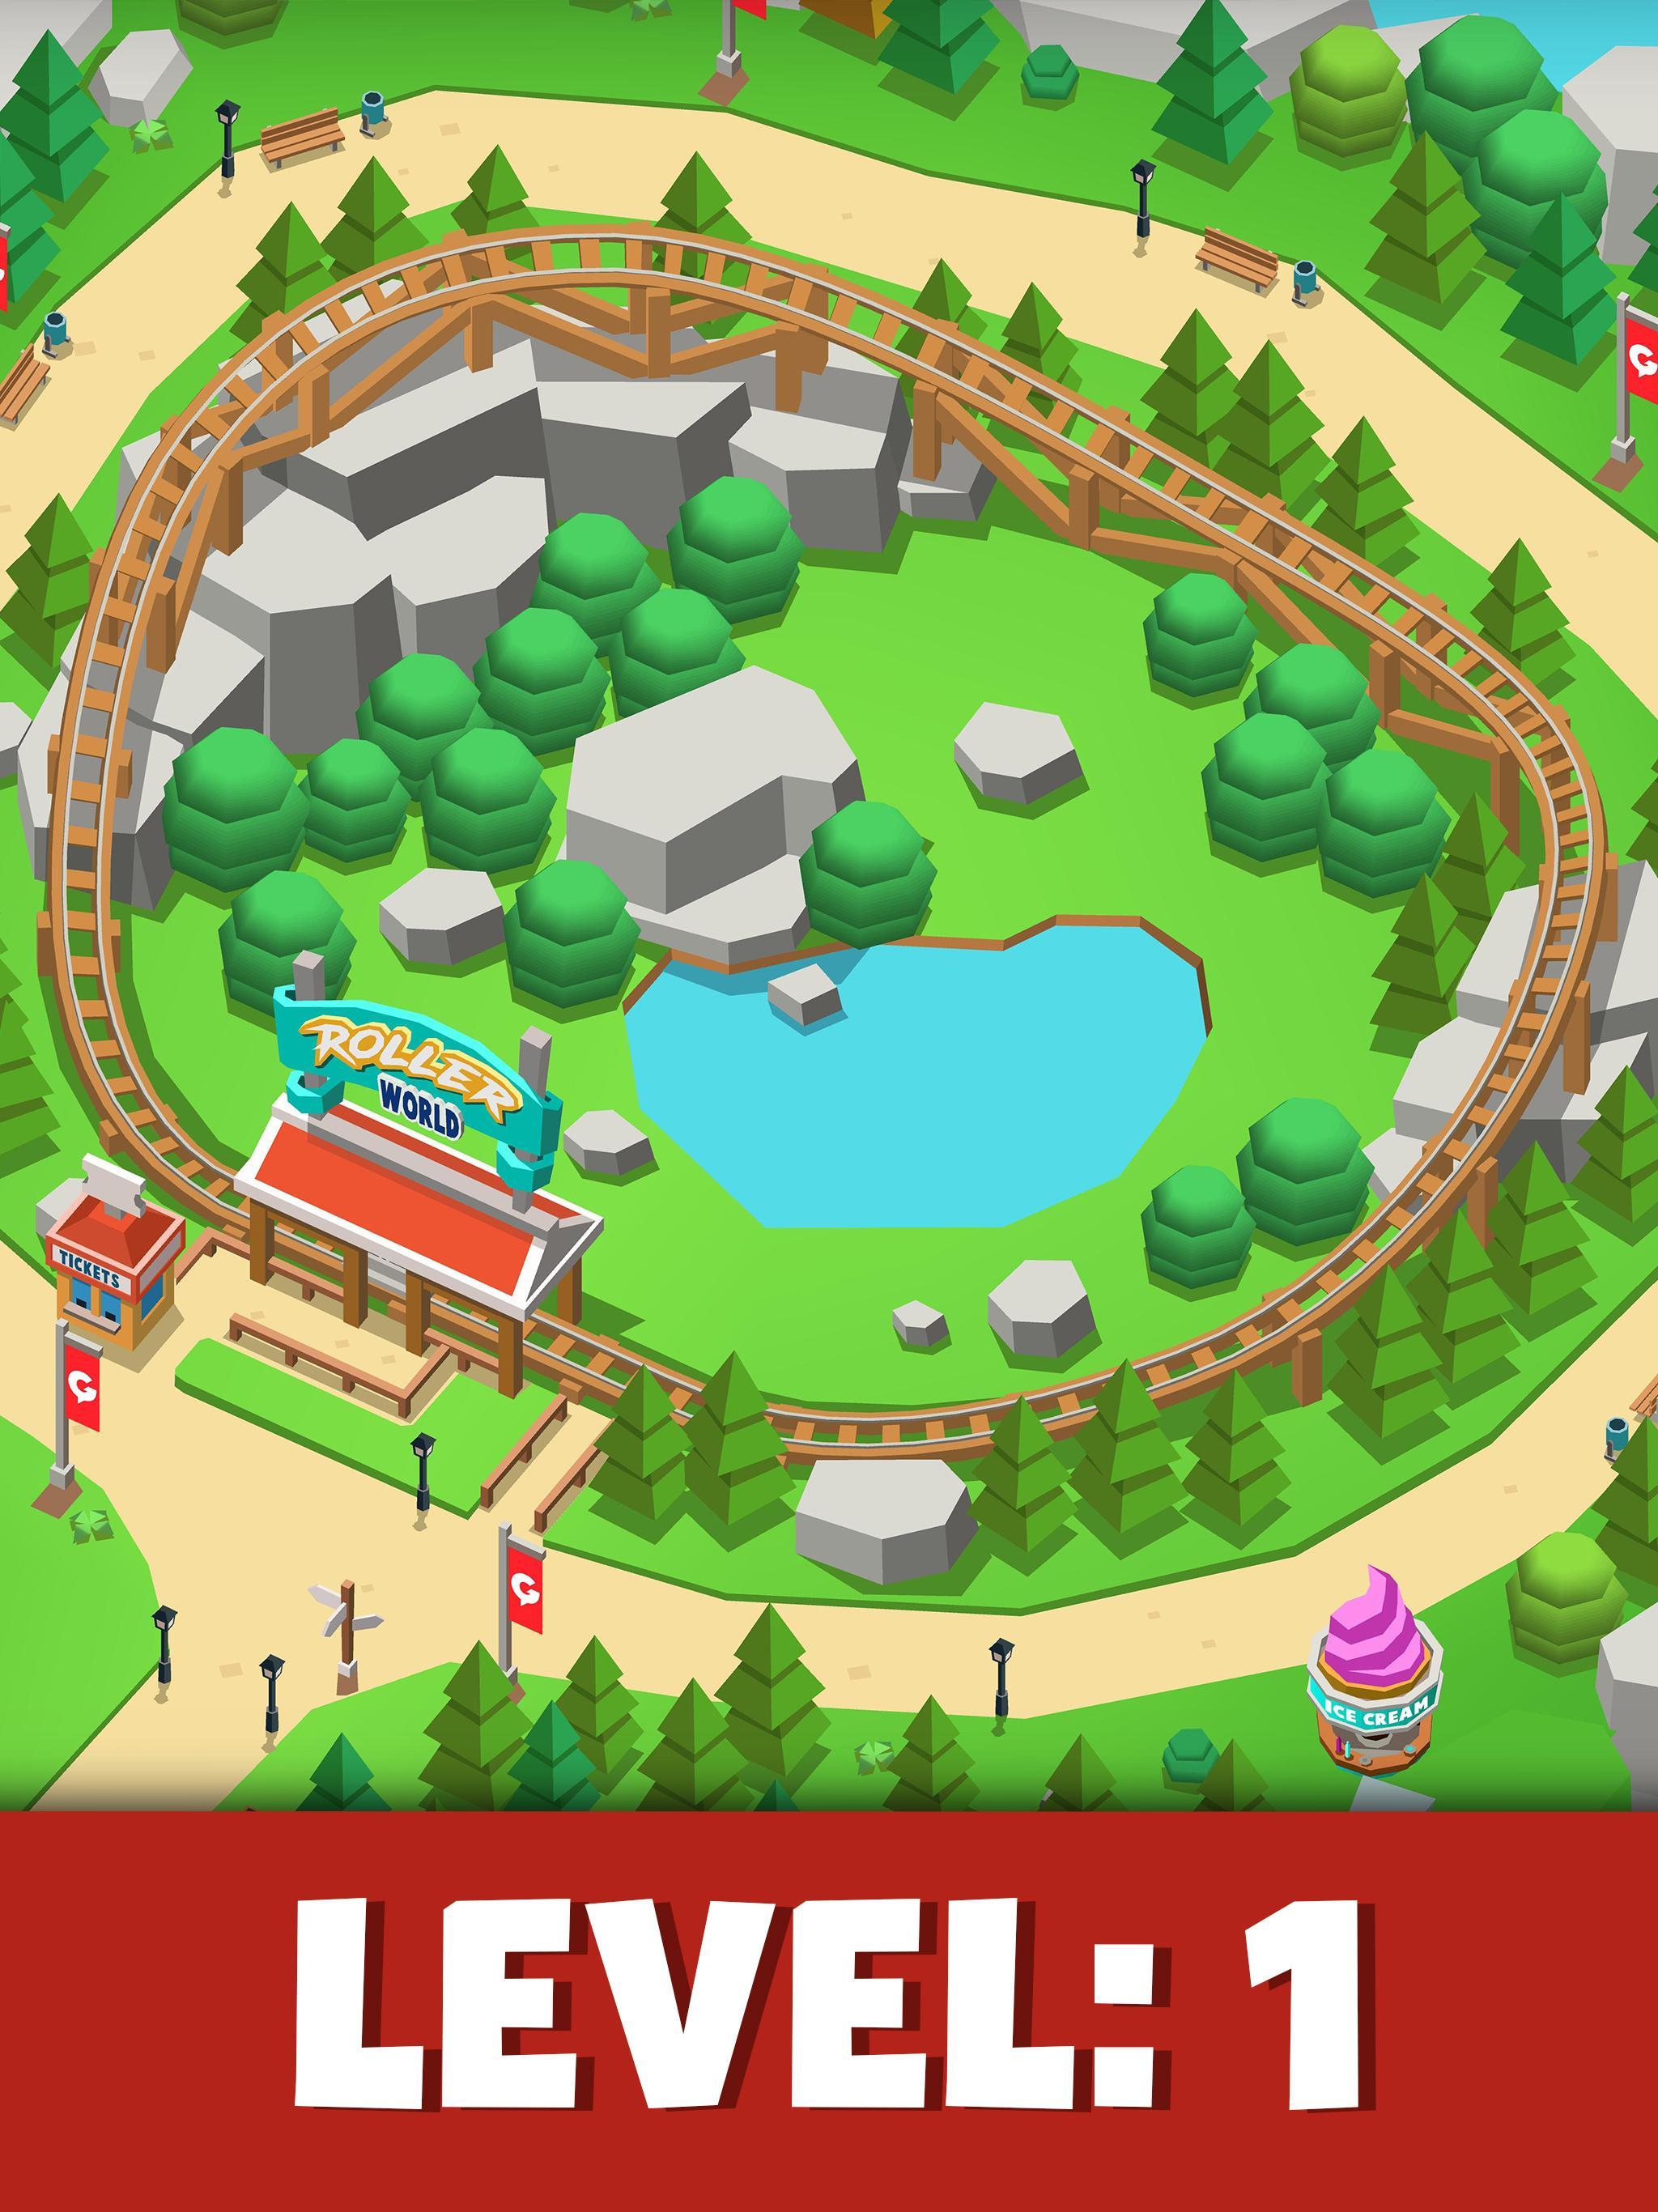 Idle Theme Park Tycoon Recreation Game For Android Apk Download - making the best theme park in roblox youtube cool themes